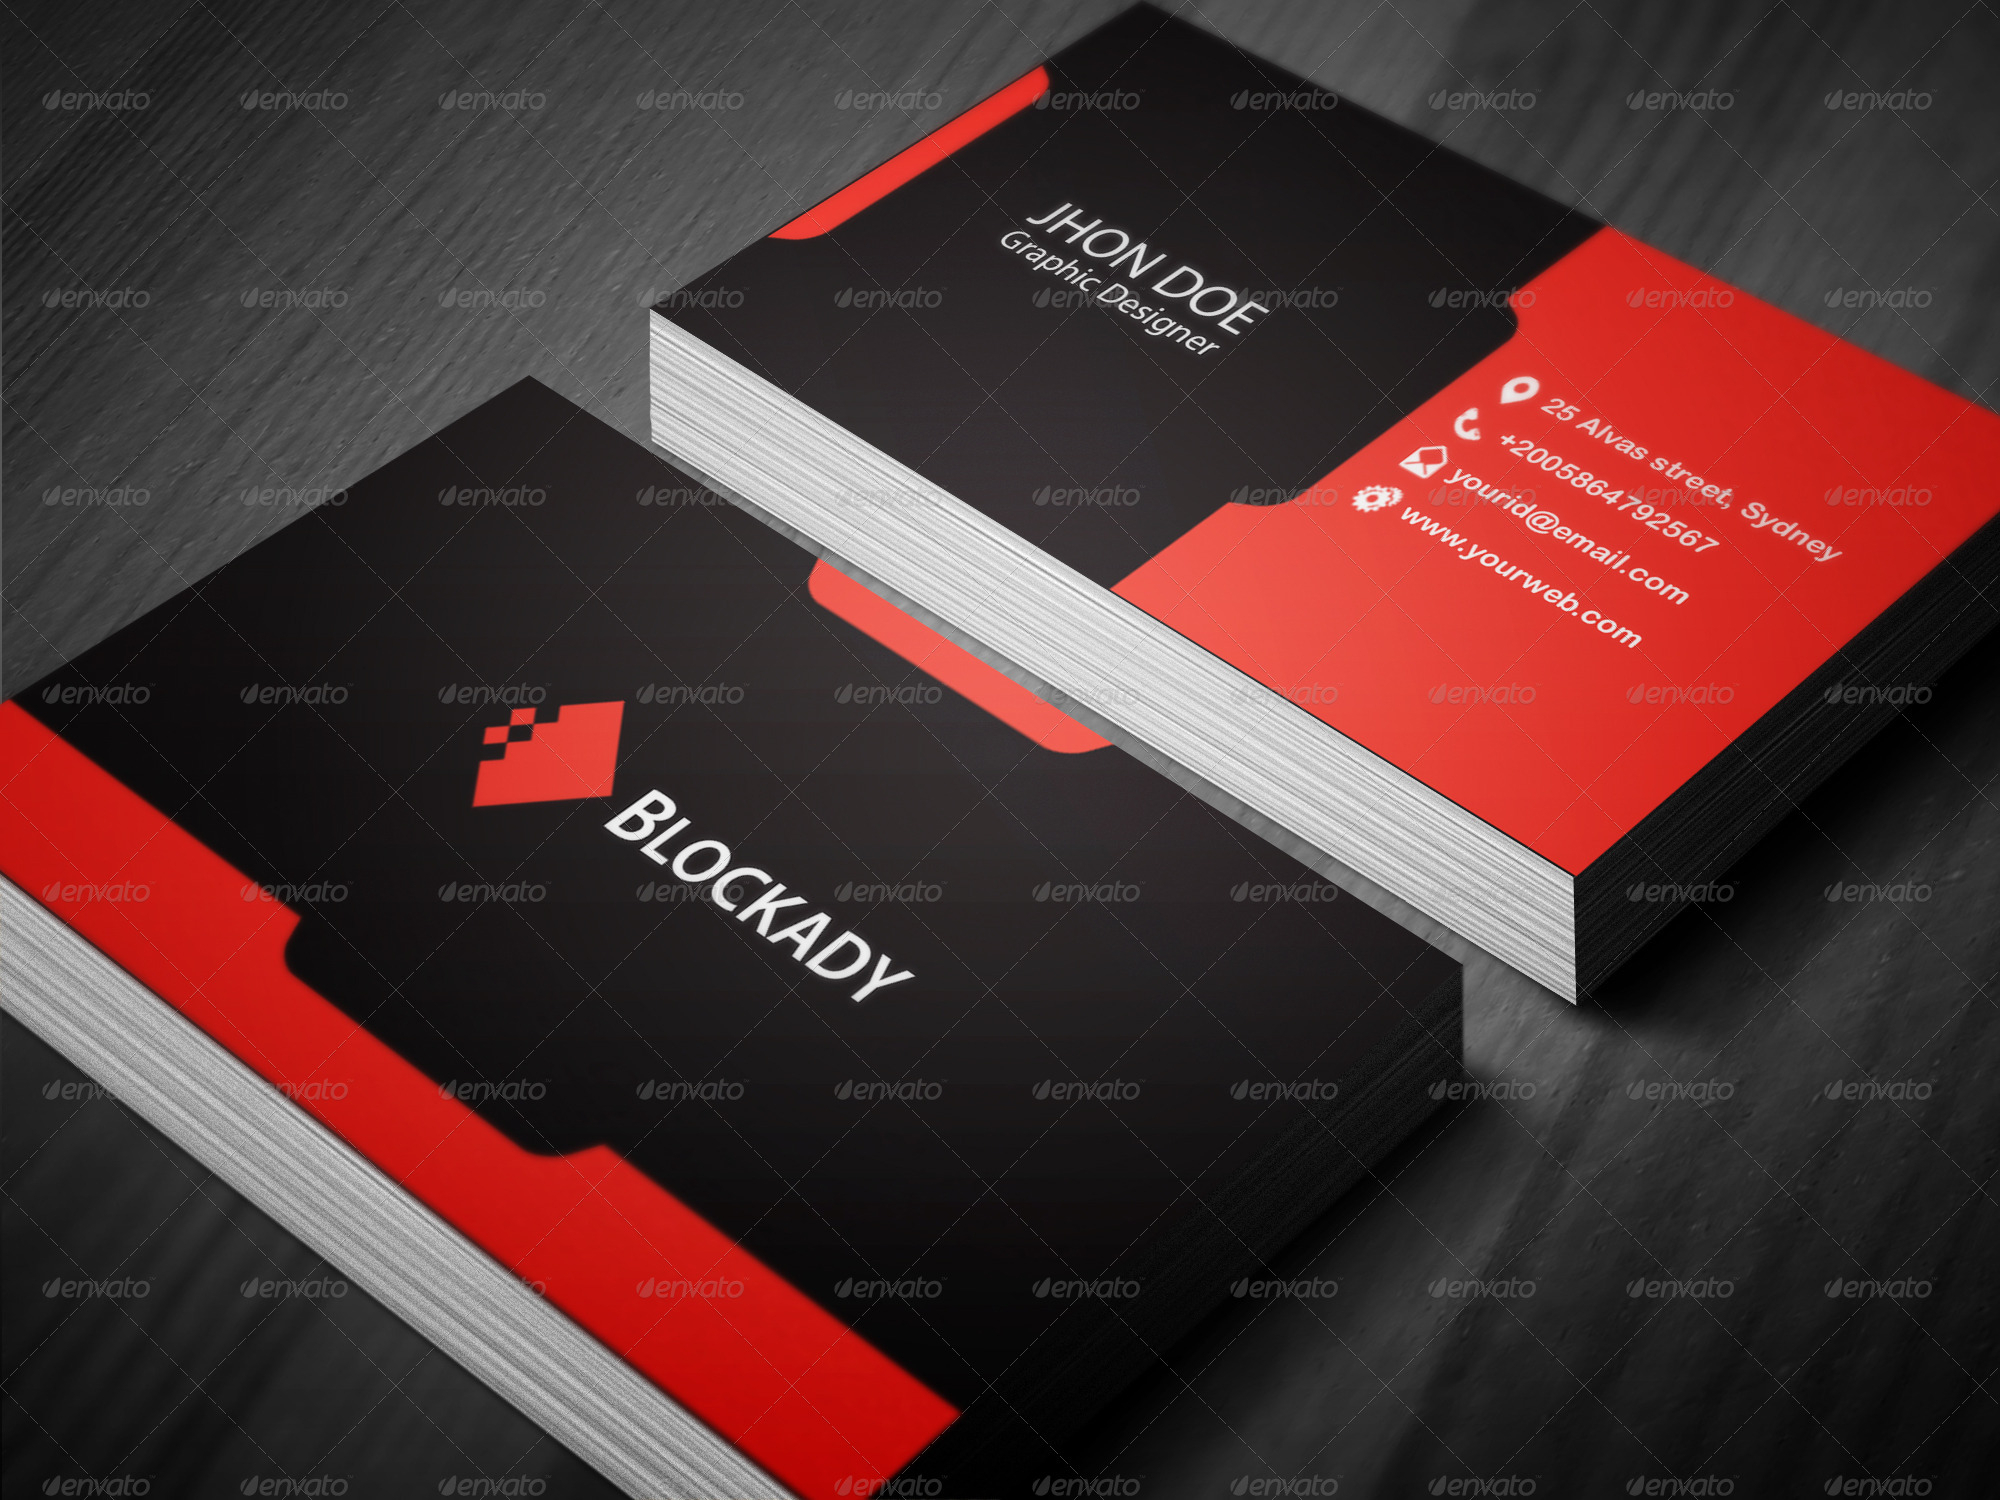 2 Colors Creative Business Card Template V.2 Intended For Web Design Business Cards Templates